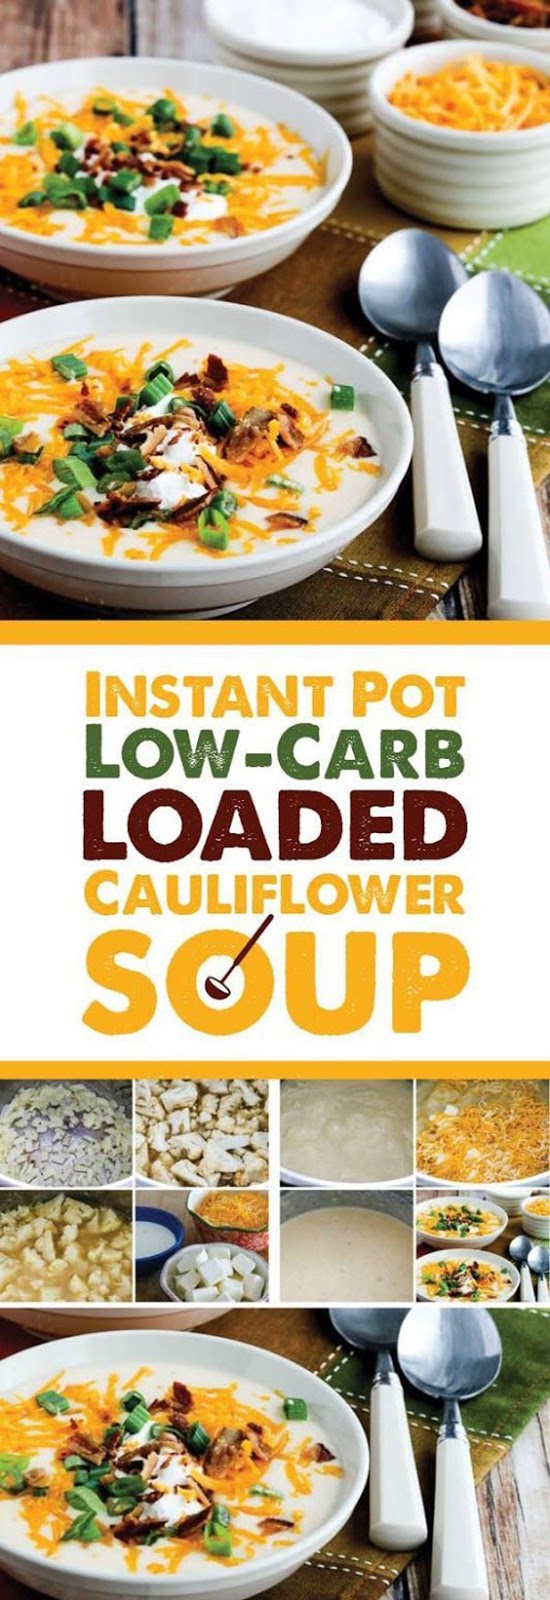 Instant Pot Low-Carb Loaded Cauliflower